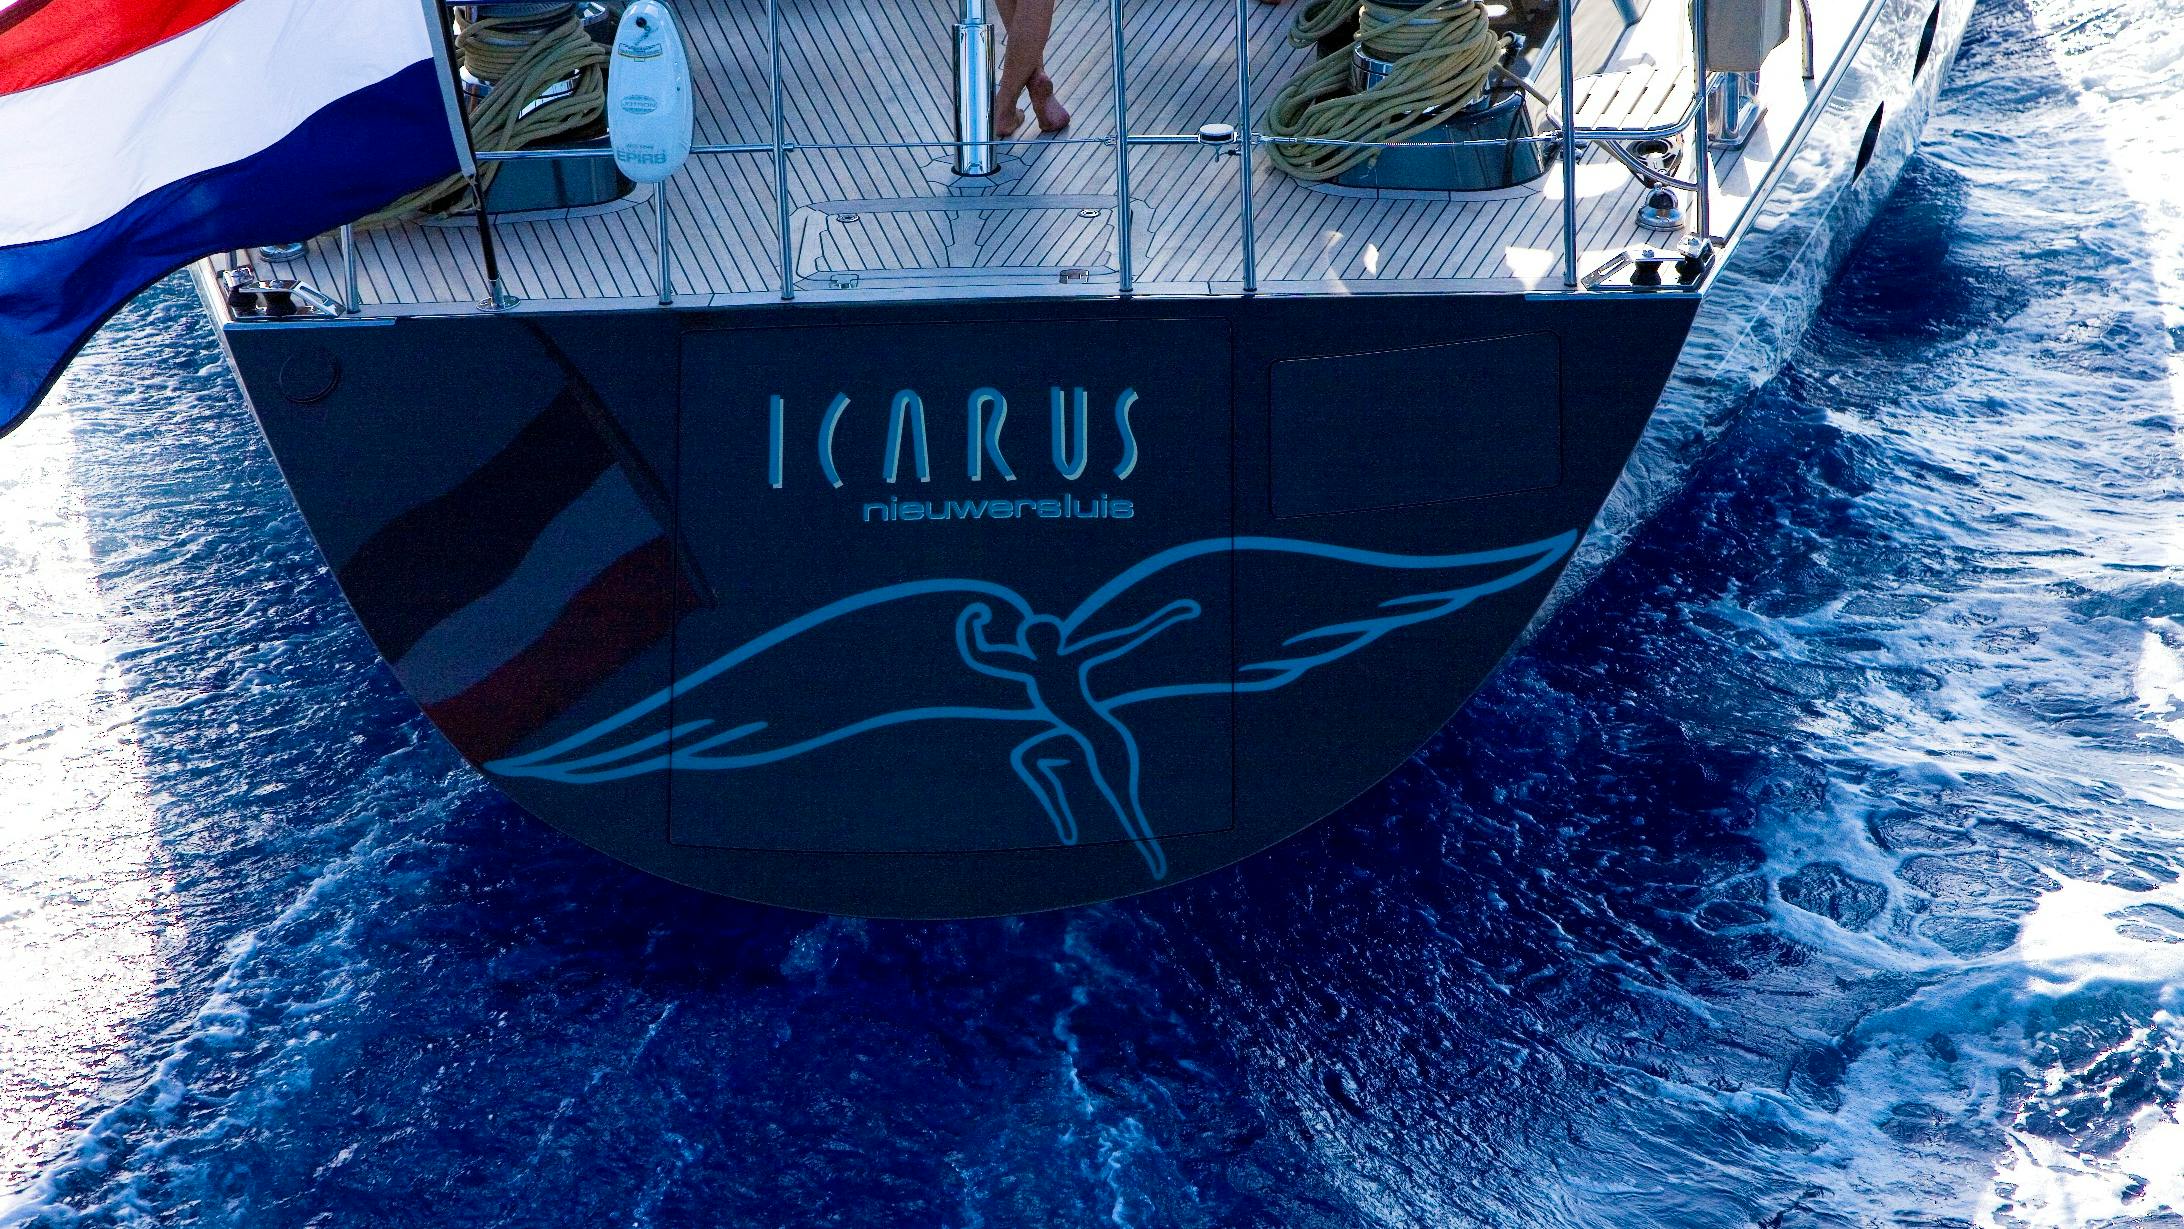 ICARUS Yacht